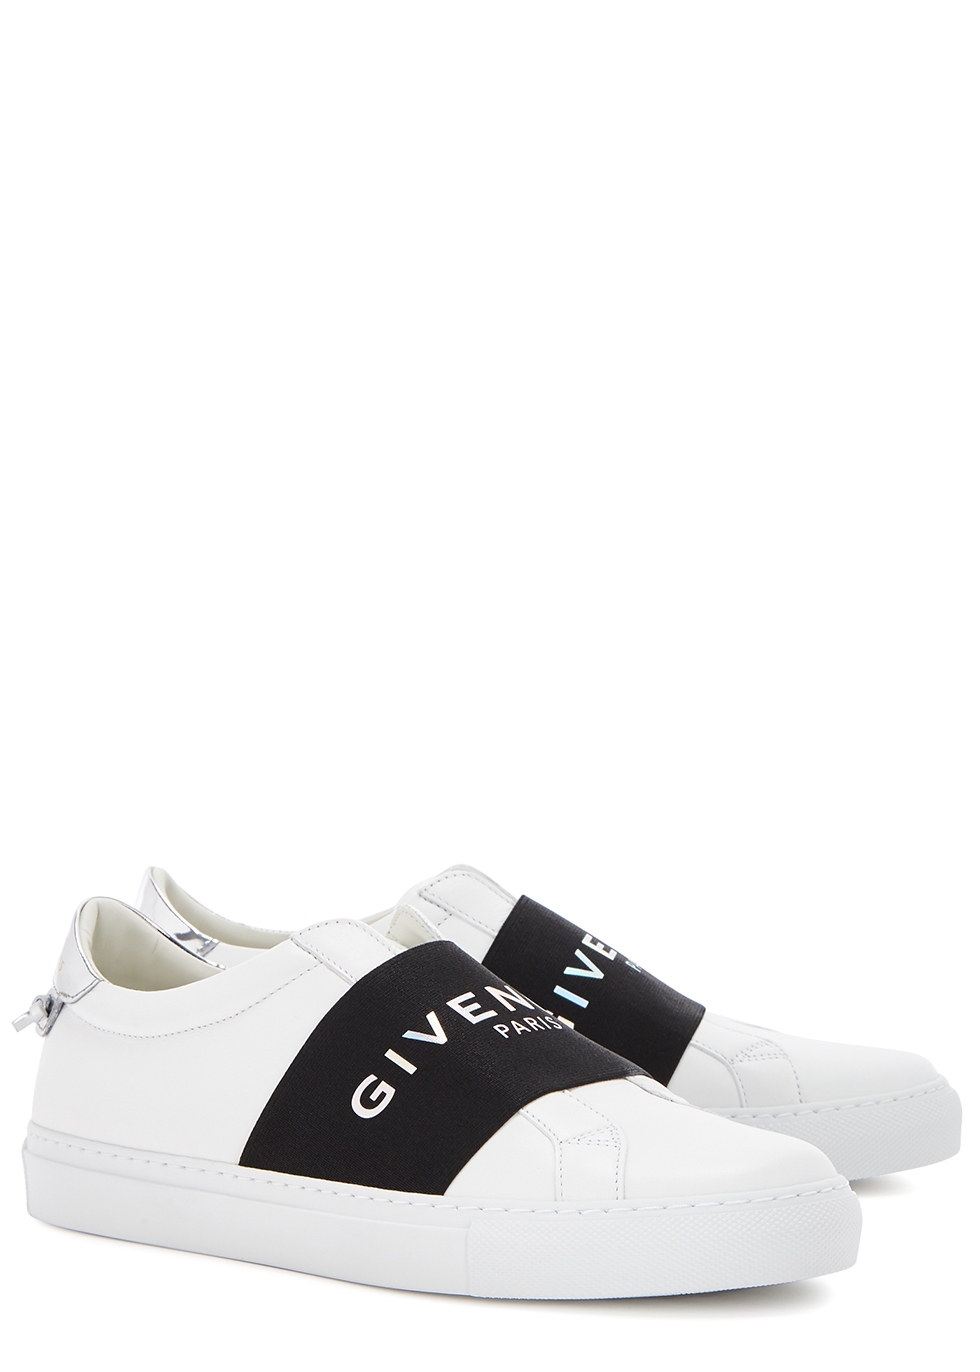 givenchy white and black sneakers